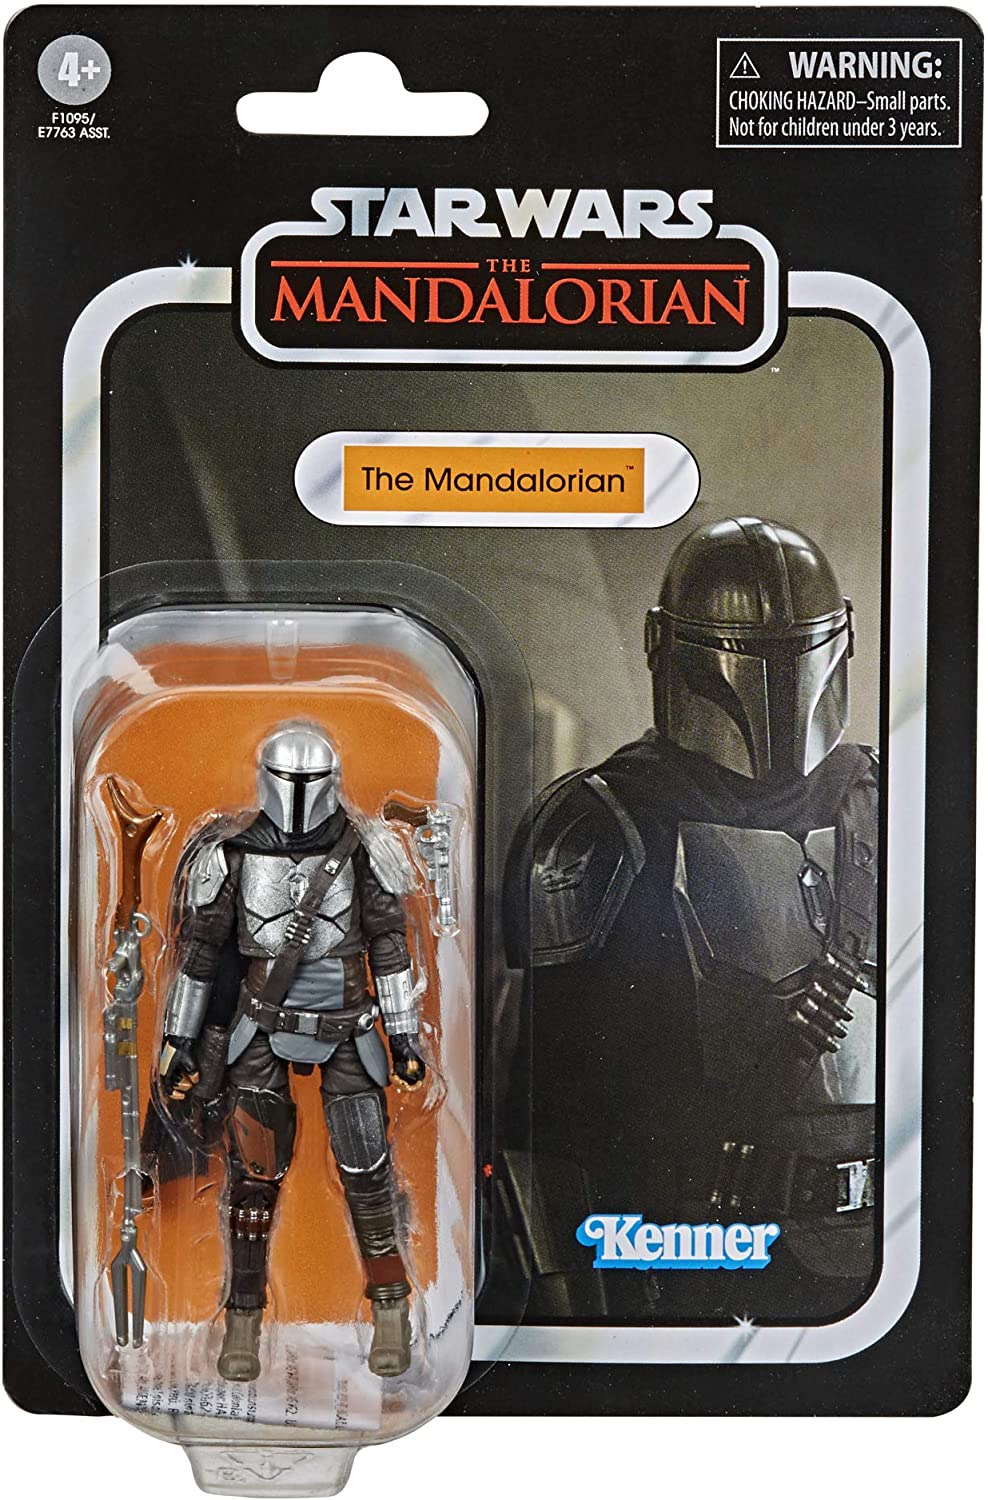 Star Wars The Mandalorian 3.75 Inch Action Figure | Free Shipping ...